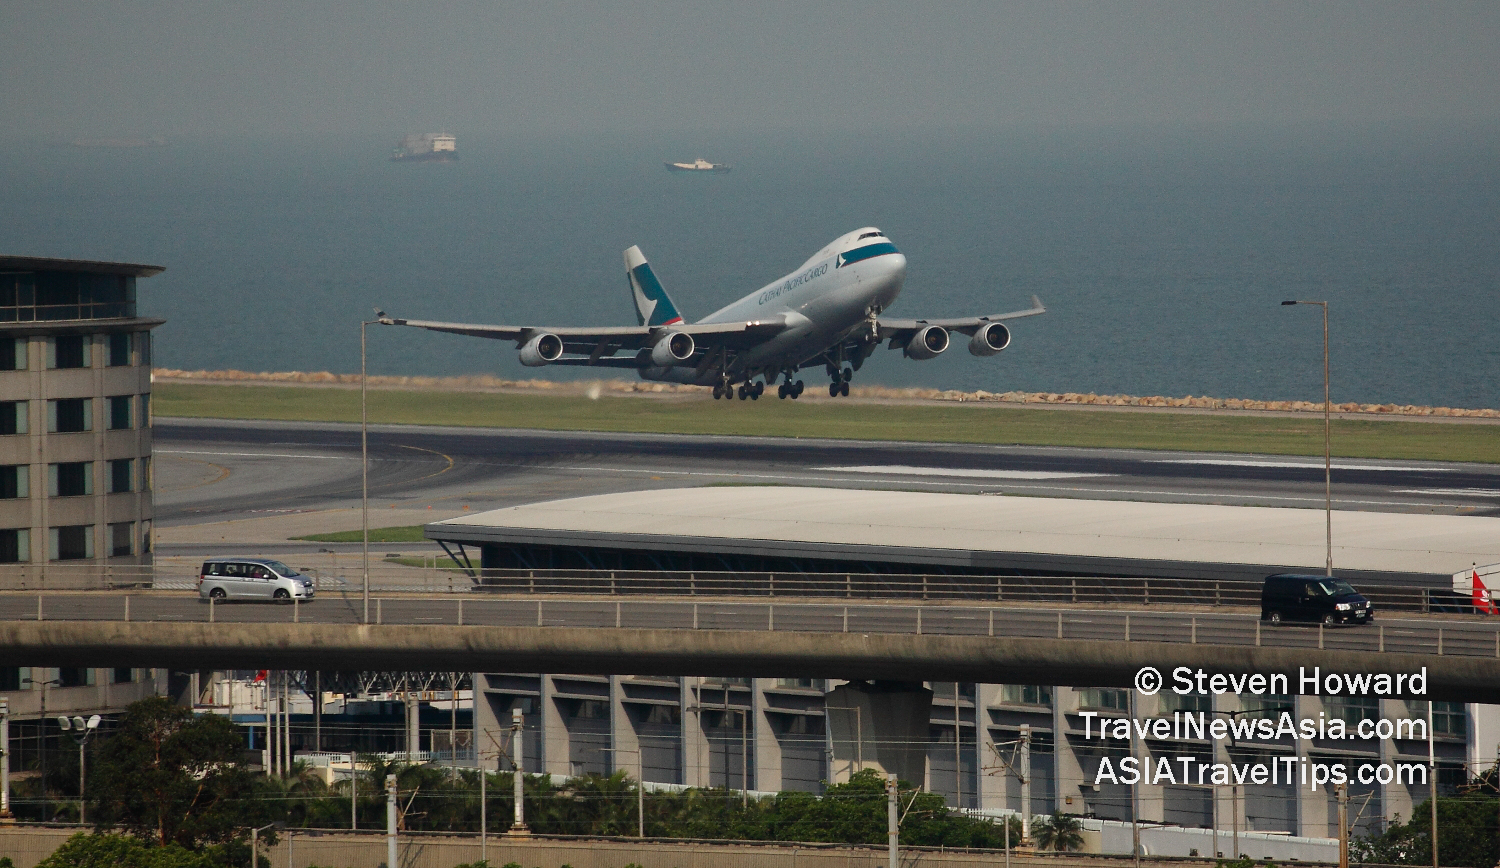 Old picture of a Cathay Pacific Boeing 747F reg: B-HUQ taking off from HKIA. Picture by Steven Howard of TravelNewsAsia.com Click to enlarge.